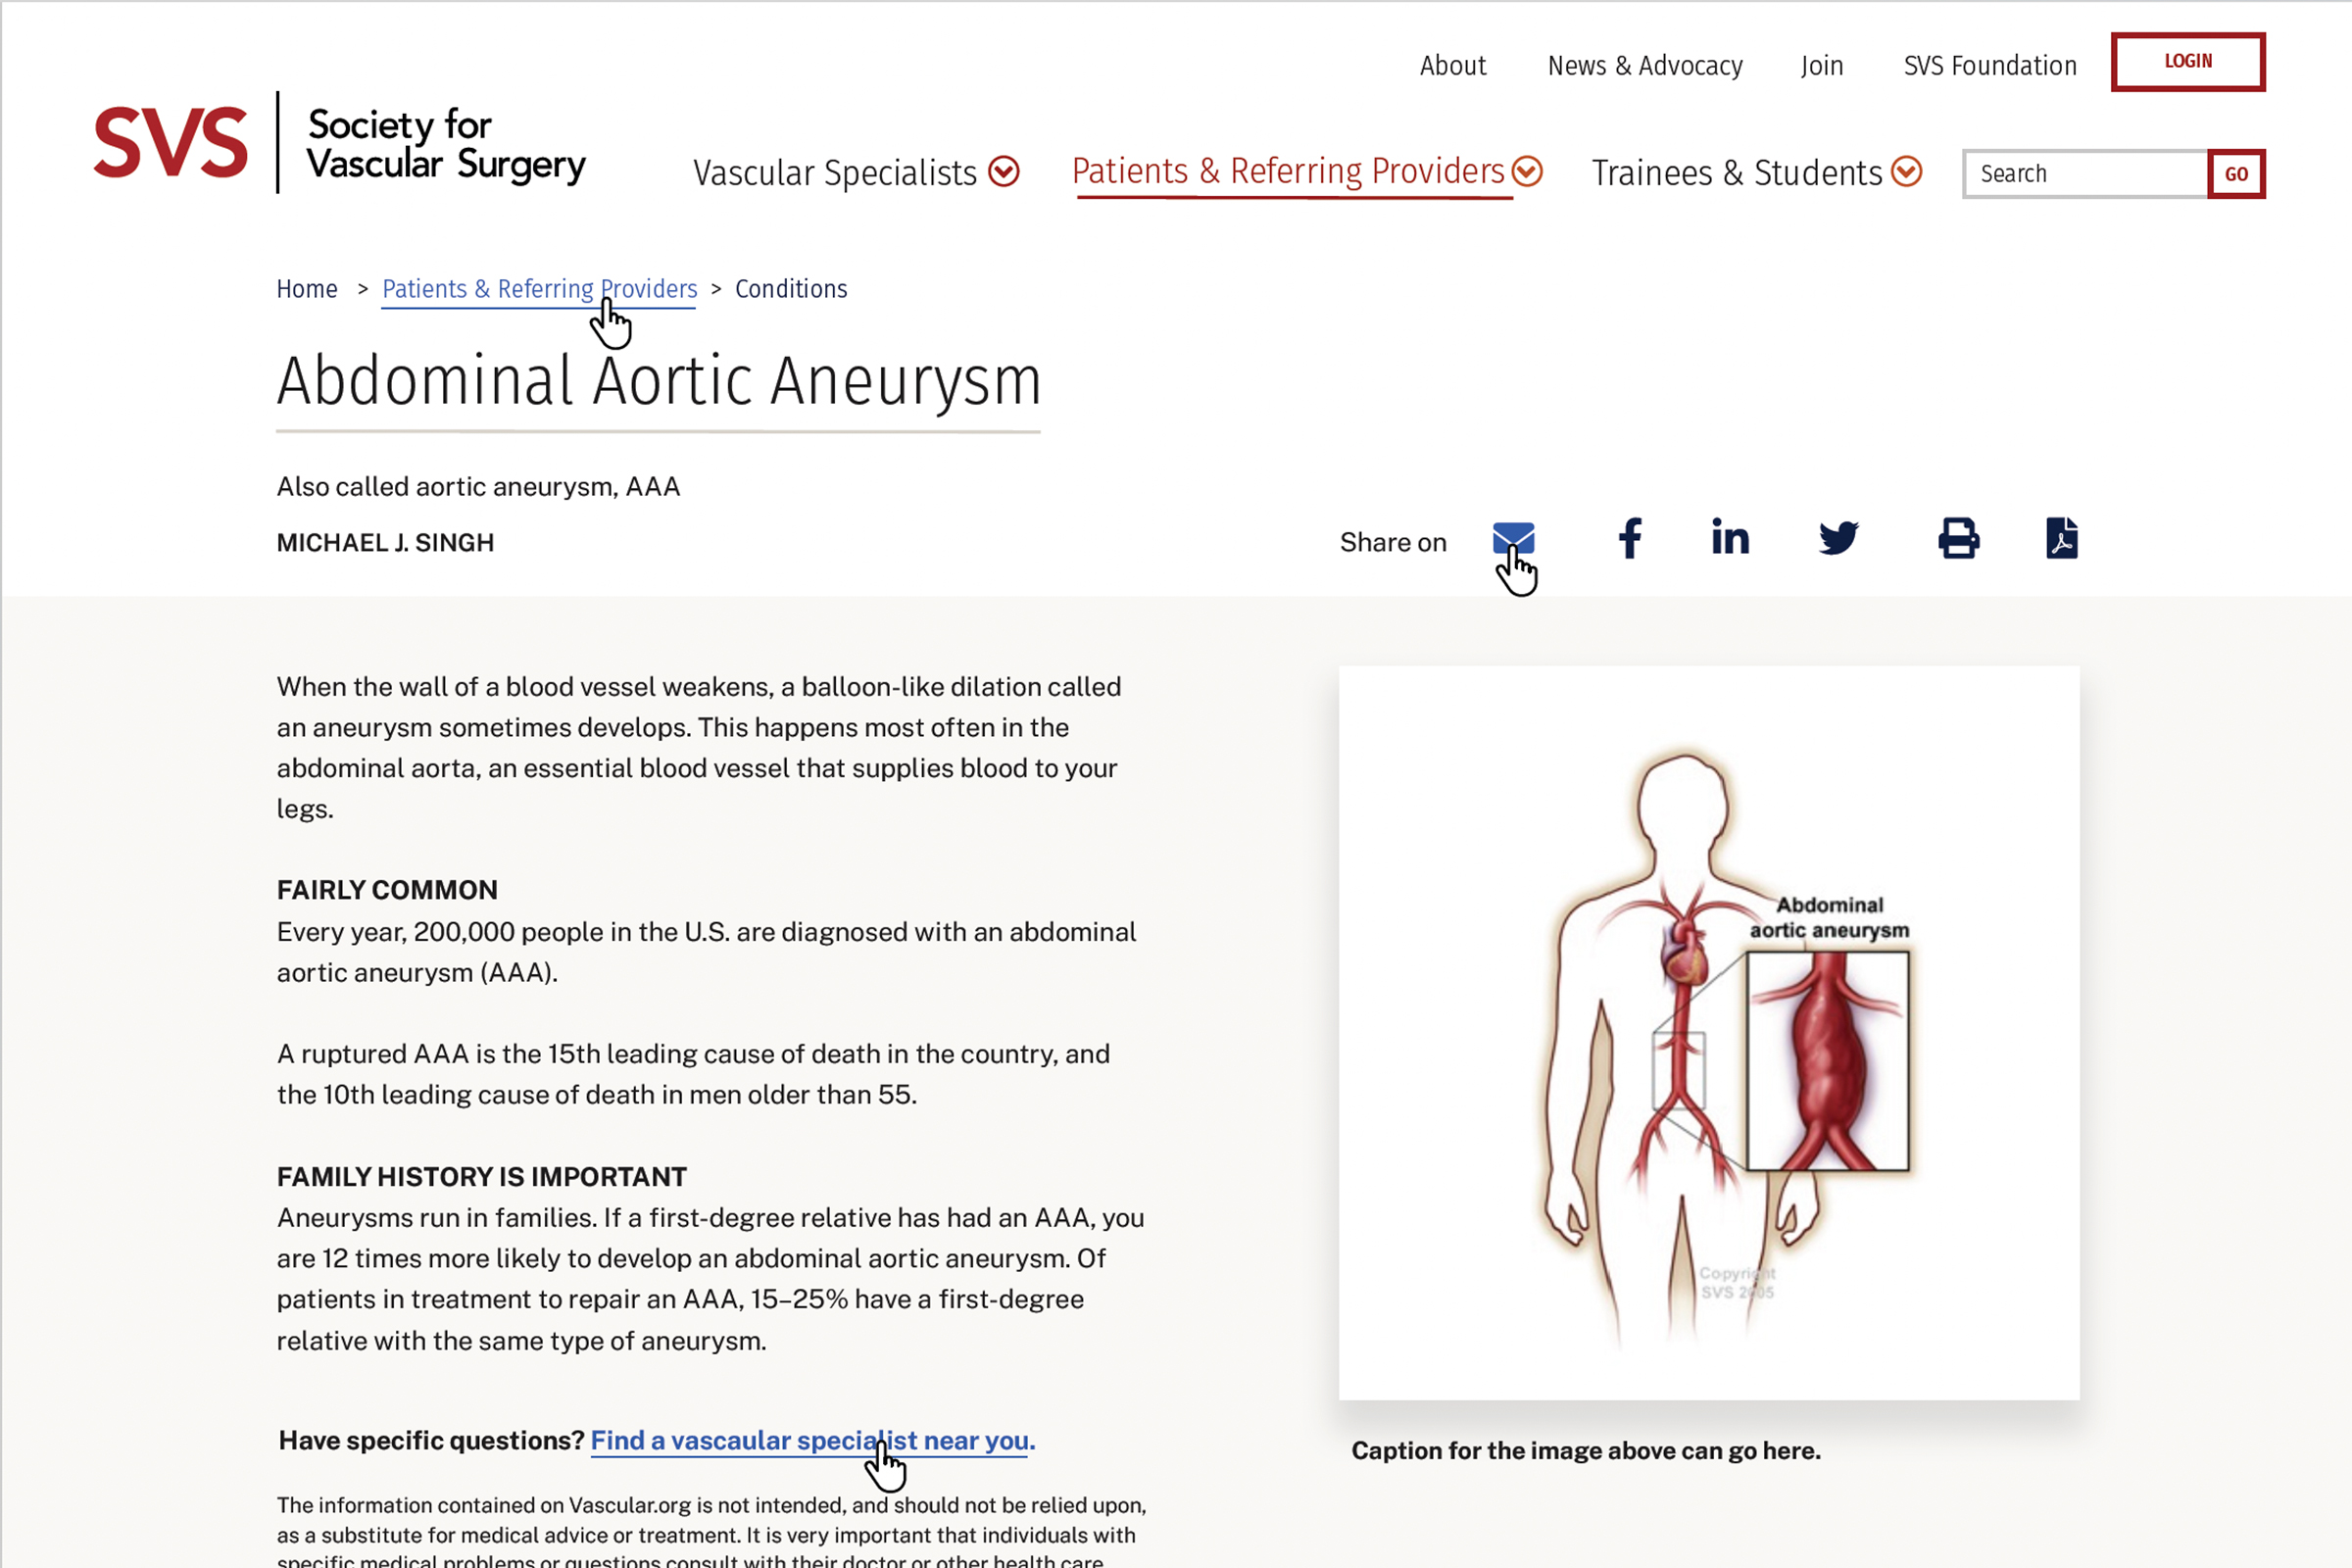 A patient condition page showing Abdominal Aortic Aneurysm with anatomical images and jump links to easily navigate content